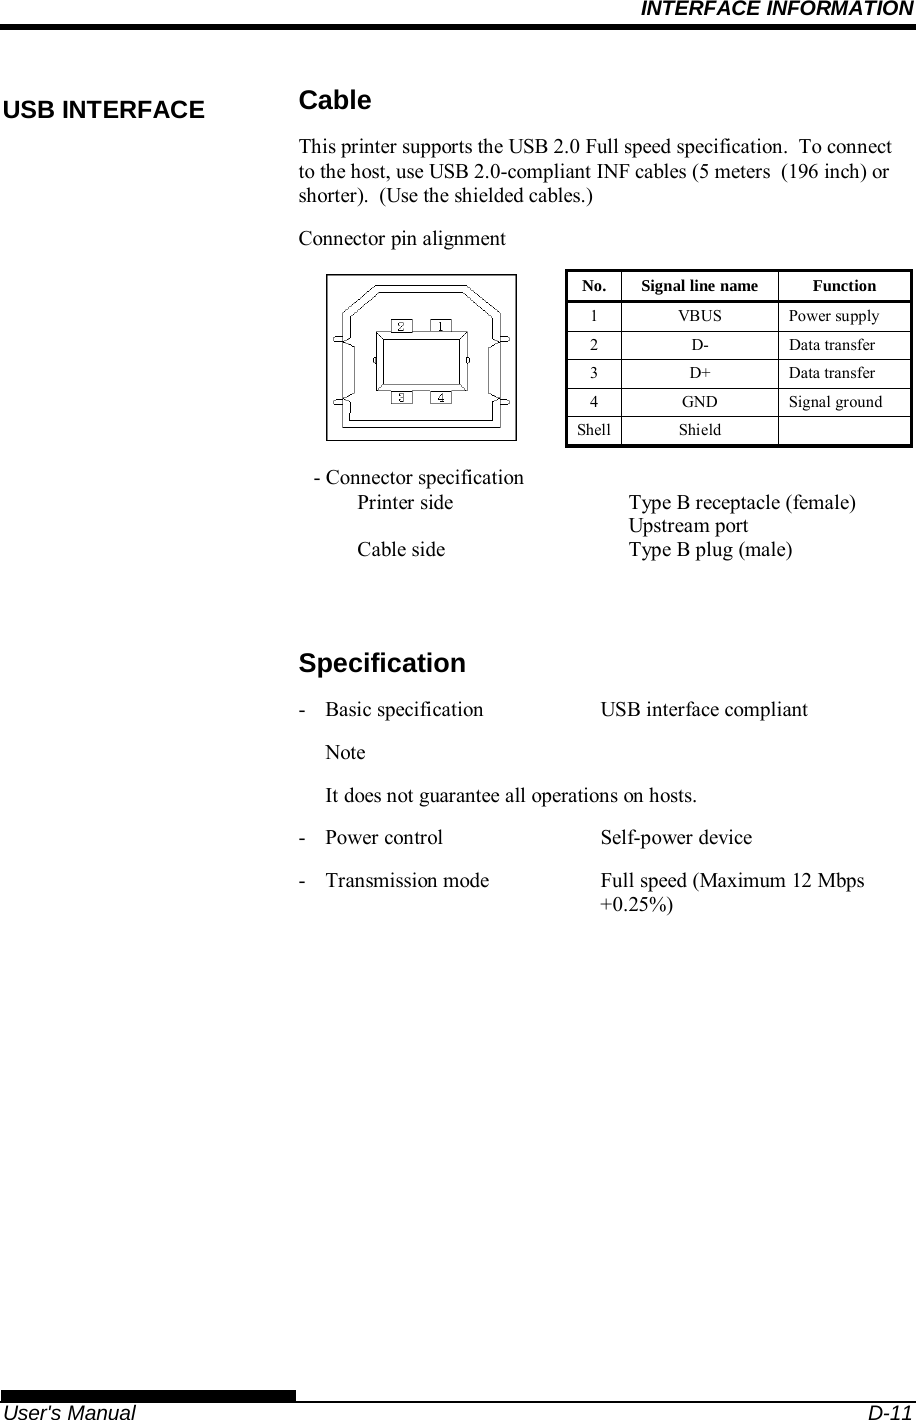 INTERFACE INFORMATION    User&apos;s Manual  D-11 Cable This printer supports the USB 2.0 Full speed specification.  To connect to the host, use USB 2.0-compliant INF cables (5 meters  (196 inch) or shorter).  (Use the shielded cables.) Connector pin alignment No. Signal line name  Function 1 VBUS Power supply 2 D- Data transfer 3 D+ Data transfer 4 GND Signal ground Shell Shield   - Connector specification Printer side  Cable side  Type B receptacle (female) Upstream port Type B plug (male)  Specification -  Basic specification  USB interface compliant  Note   It does not guarantee all operations on hosts. -  Power control  Self-power device -  Transmission mode  Full speed (Maximum 12 Mbps     +0.25%) USB INTERFACE